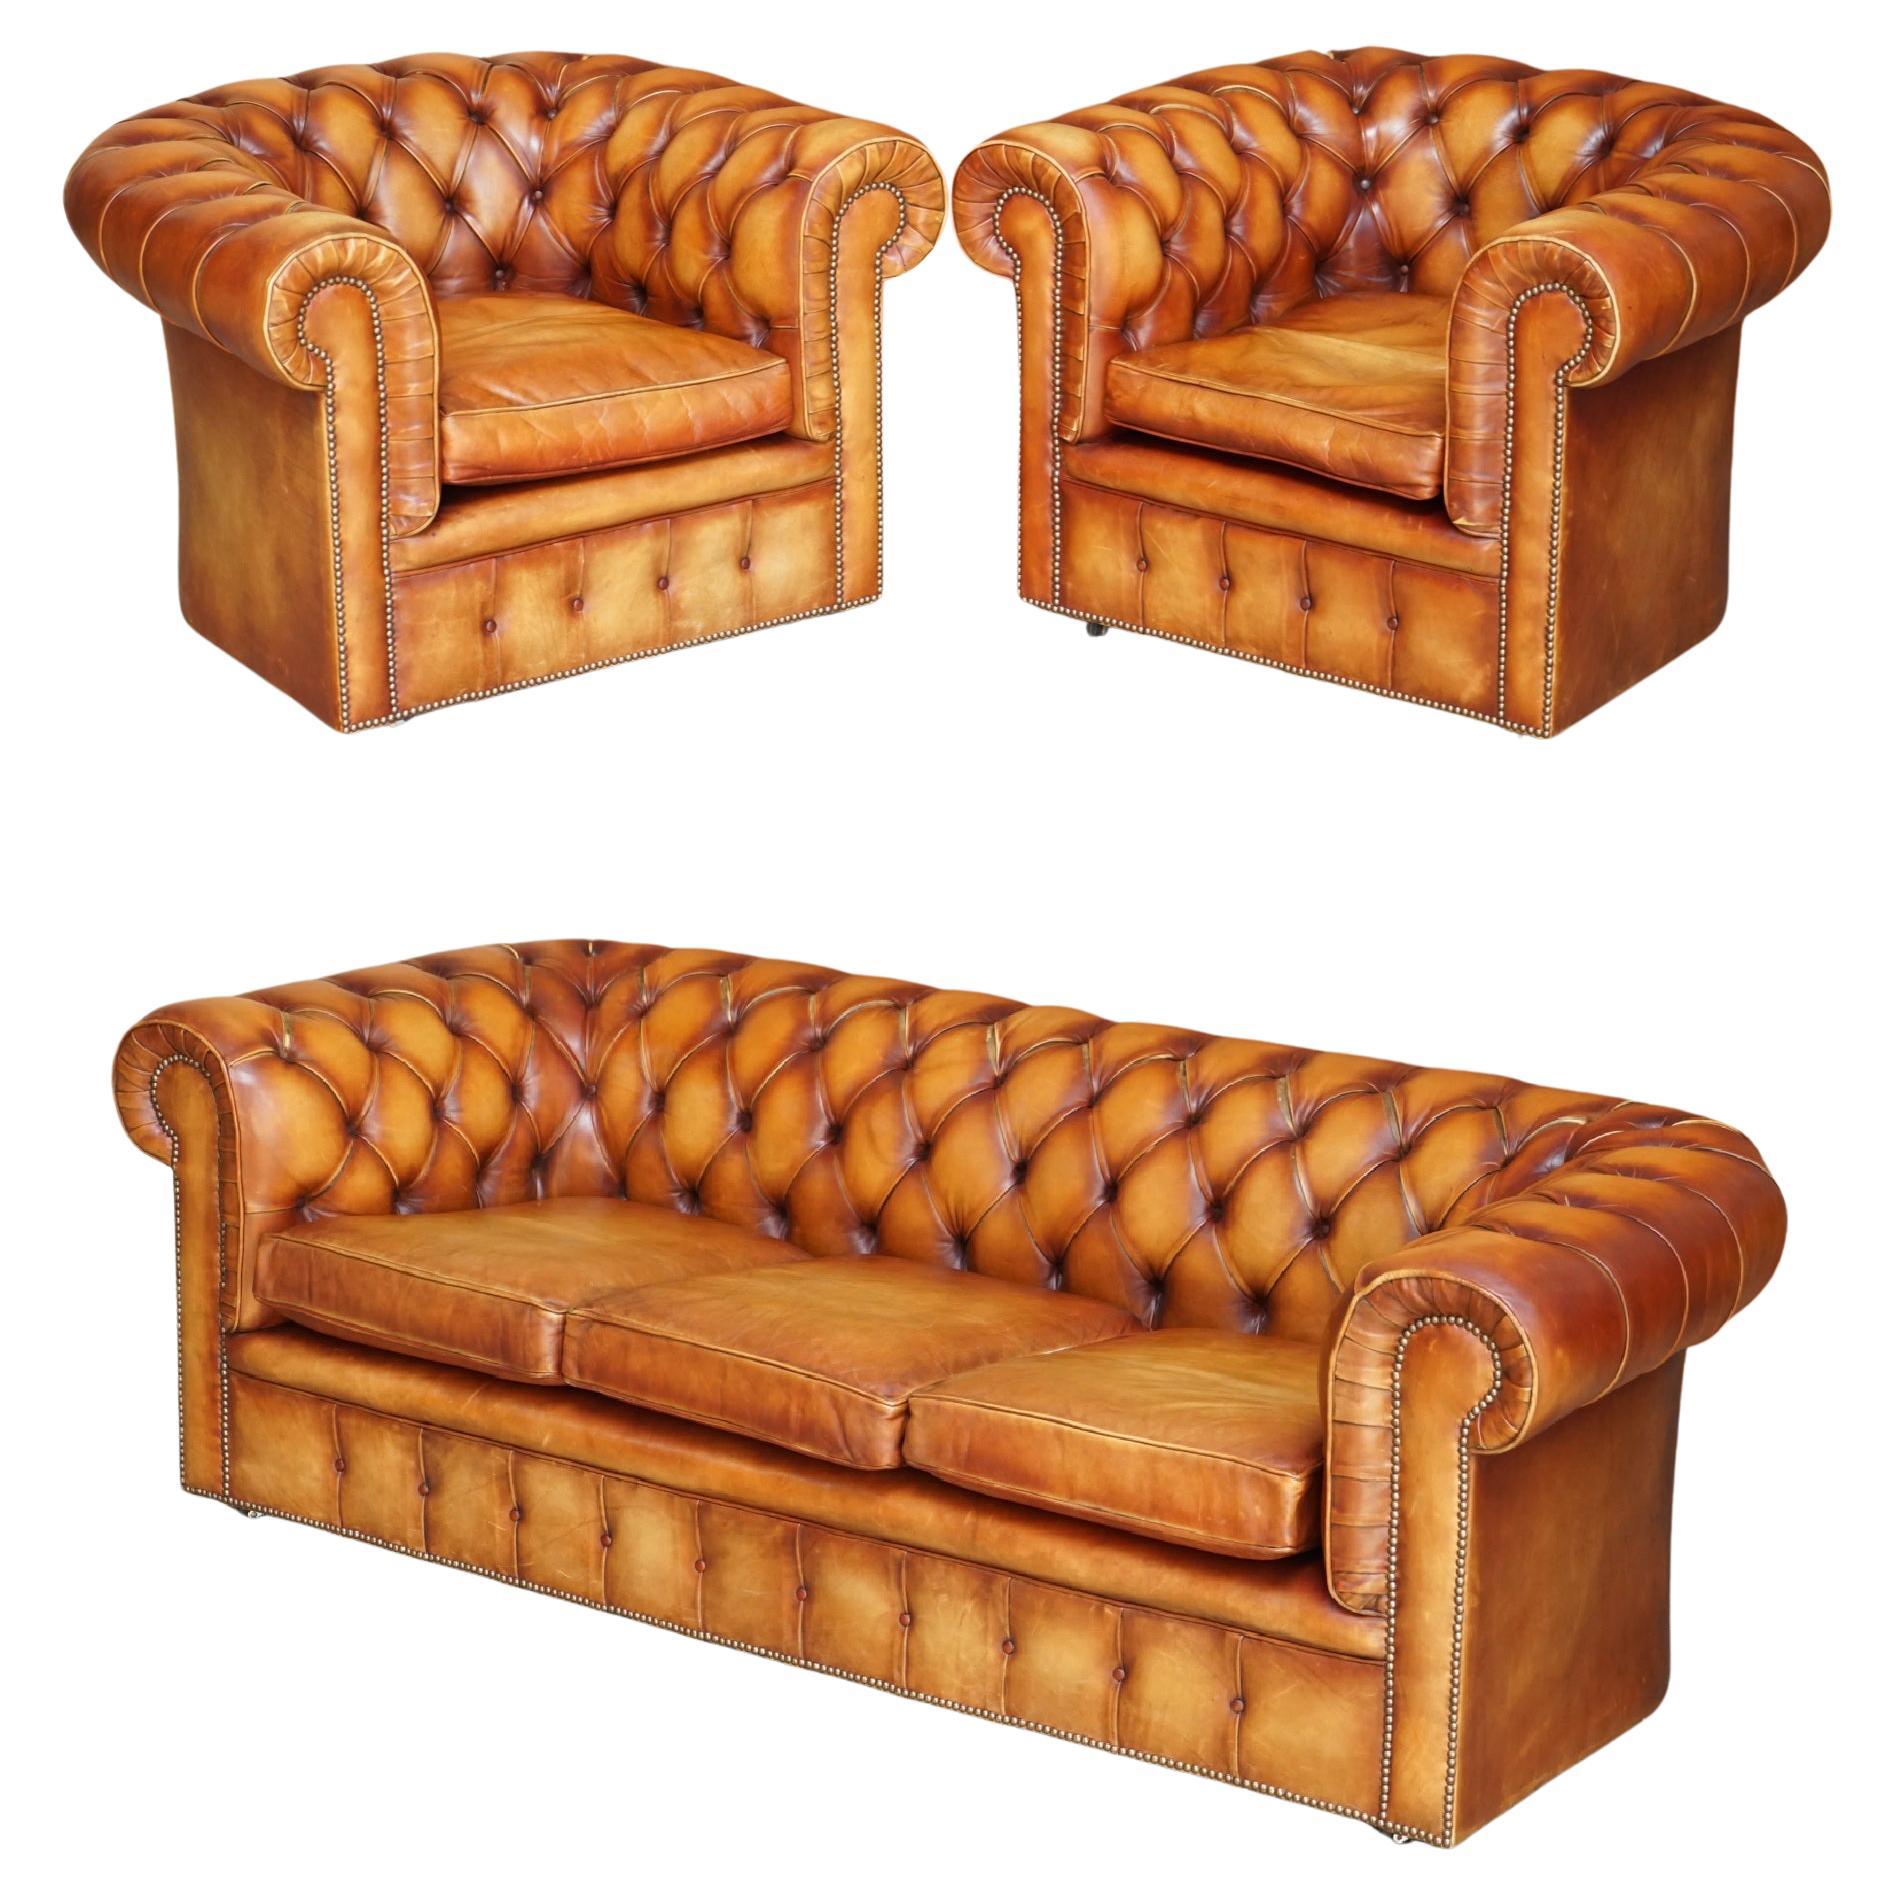 Old Chesterfield Club Three Piece Sofa & Pair of Armchairs Suite Brown Leder